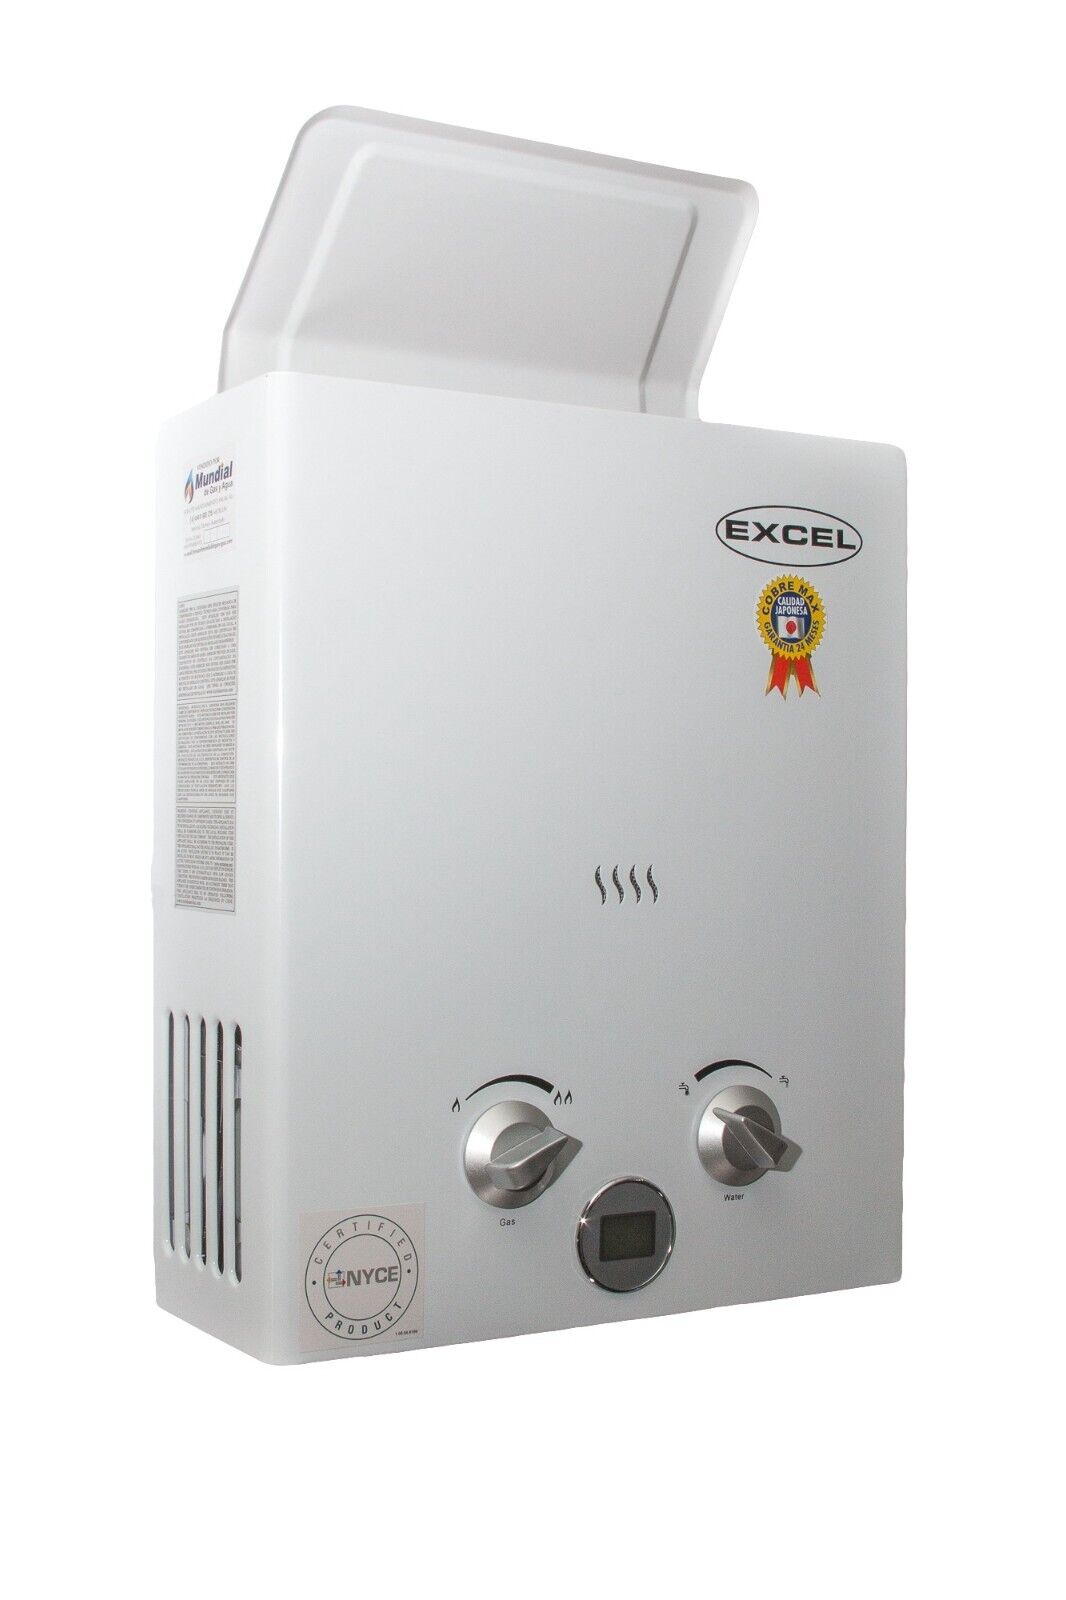 EXCEL 1.6 GPM COBREMAX  TANKLESS GAS WATER HEATER  VENTFREE (LPG)